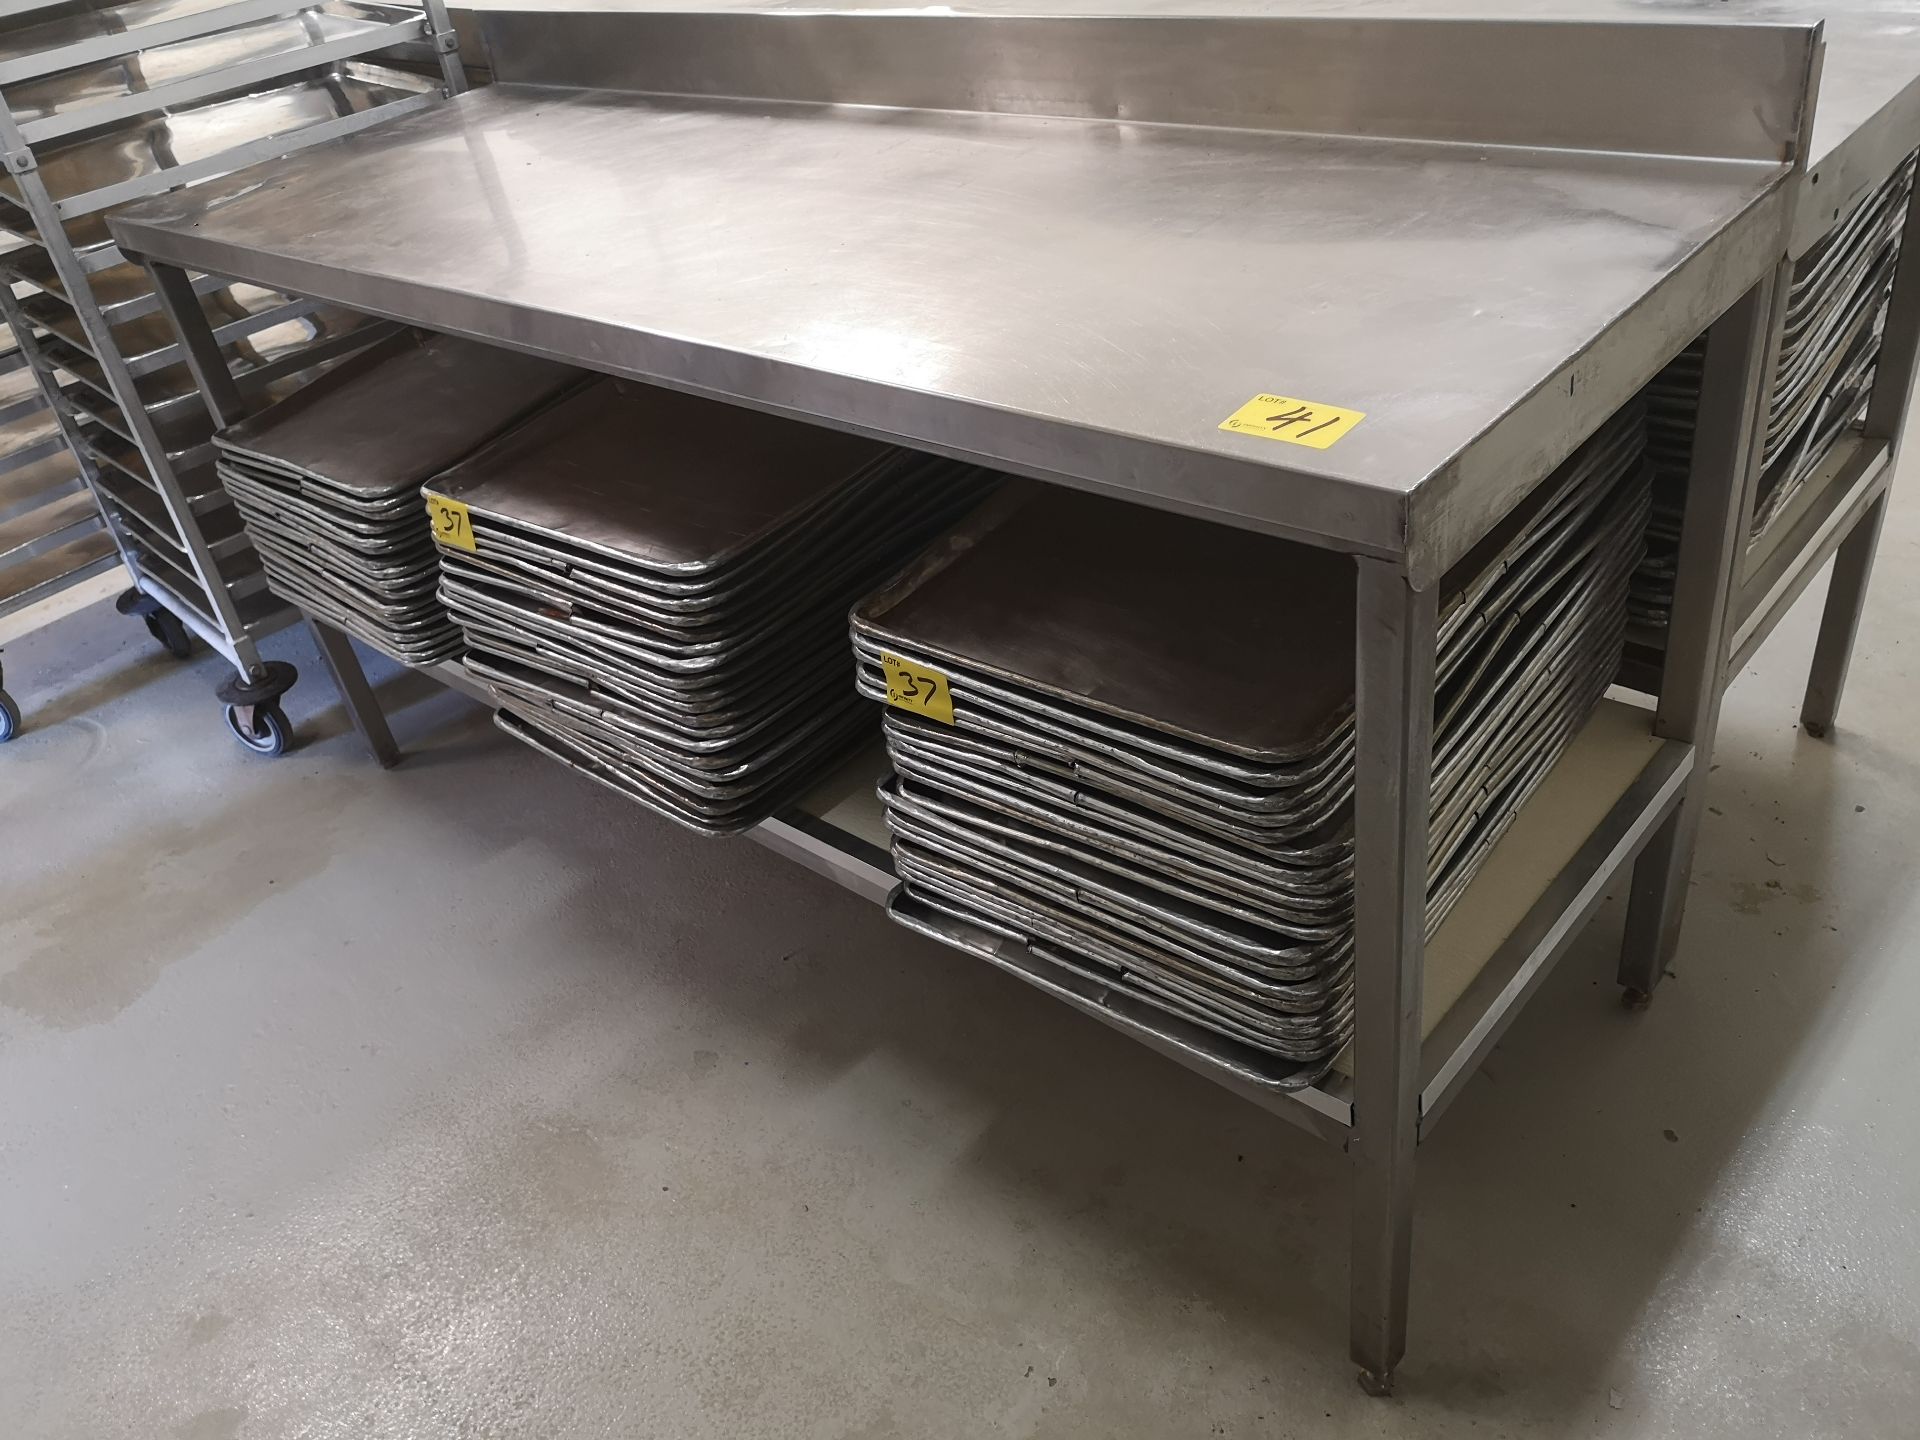 72" X 24" X 36" STAINLESS STEEL PREP TABLE